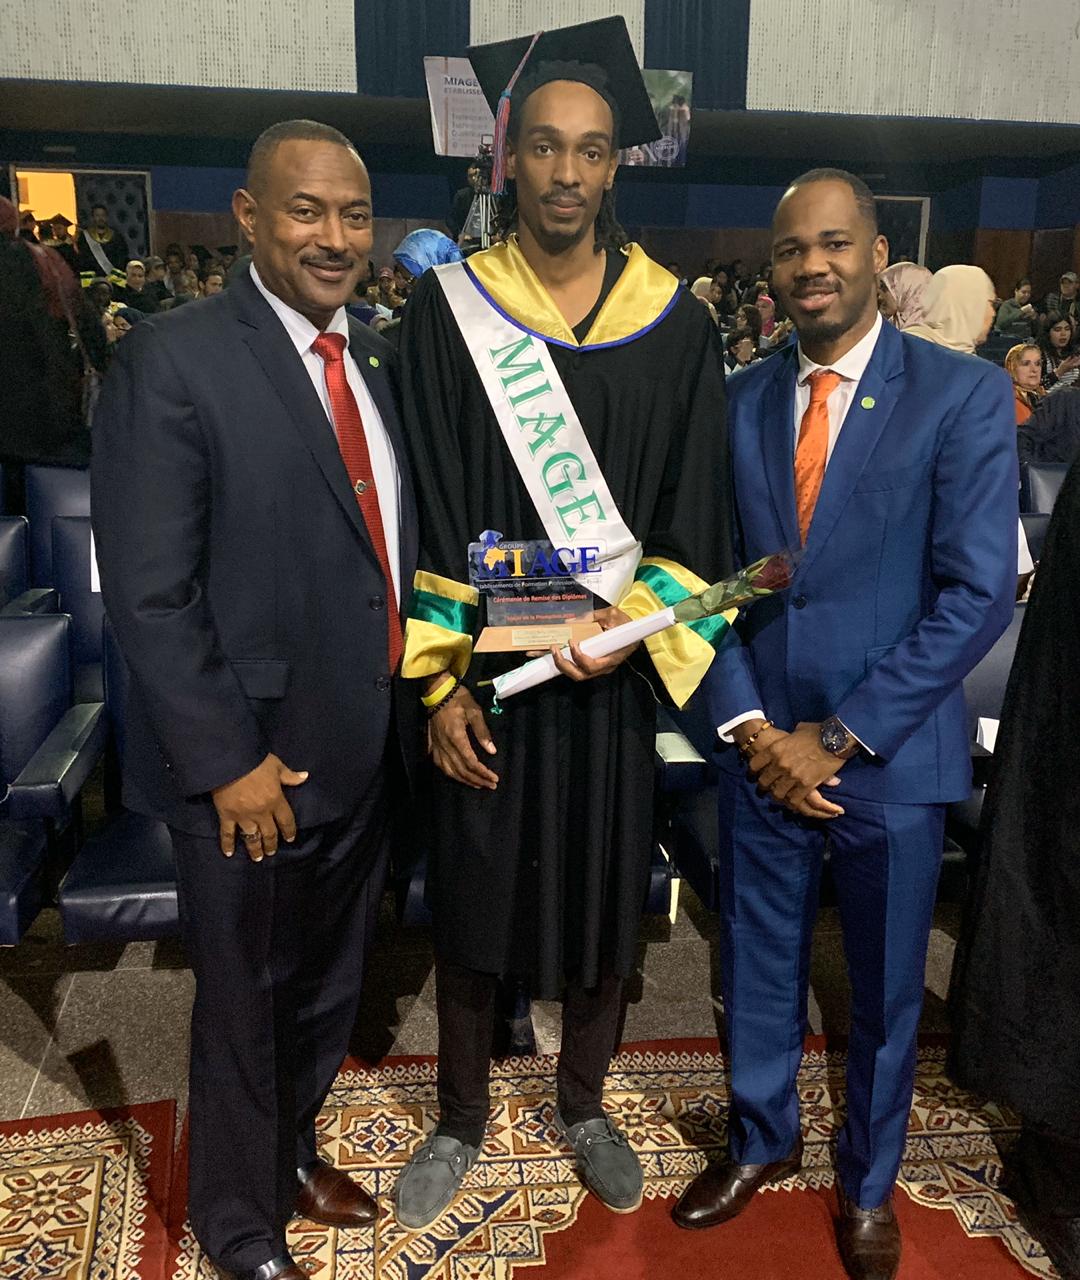 [L-R] His Excellency Ian M. Queeley, Ambassador-Designate to the Embassies of Eastern Caribbean States to the Kingdom of Morocco; Graduate Mr. Terry Gregory Lovell of the Commonwealth of Dominica; and Mr. Kurt Williams, First Secretary to the Embassies of Eastern Caribbean States to the Kingdom of Morocco, in attendance at Mr. Lovell’s graduation ceremony